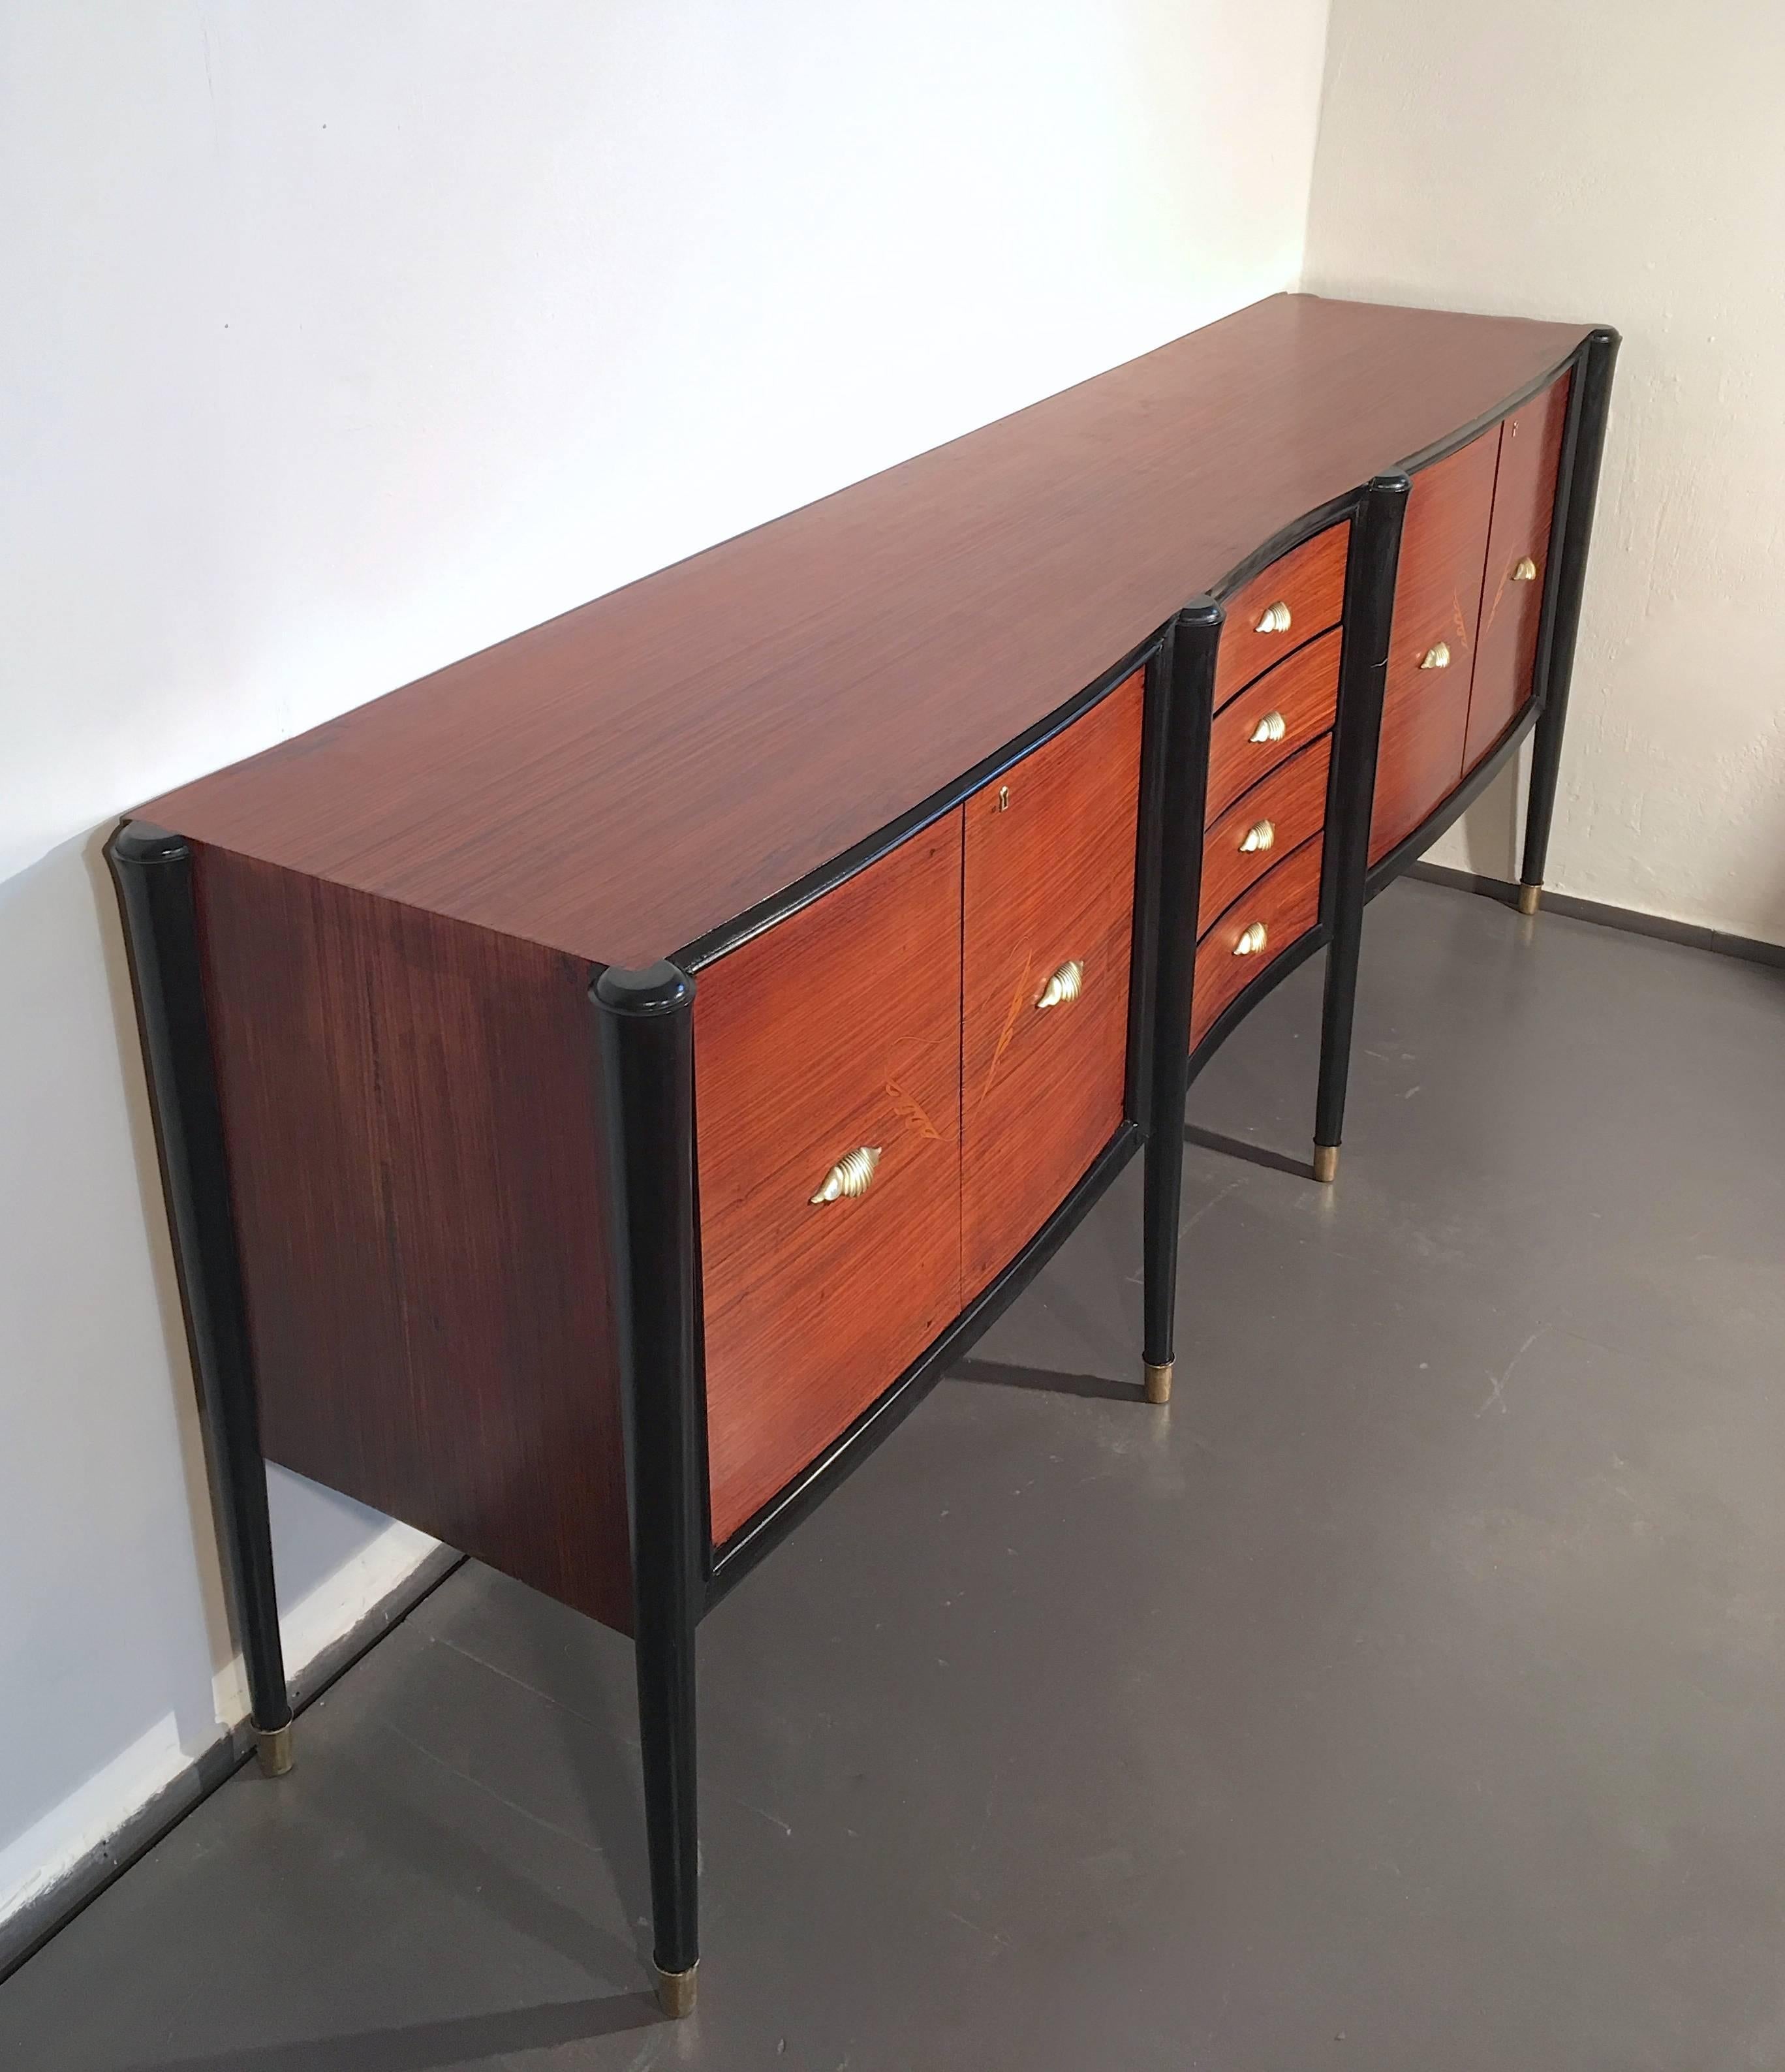 Elegant Italian credenza with a set of drawers and decorated doors on either side. Sculptural design and tapered legs. Brass details. This piece can be combined with a similar credenza in the collection.